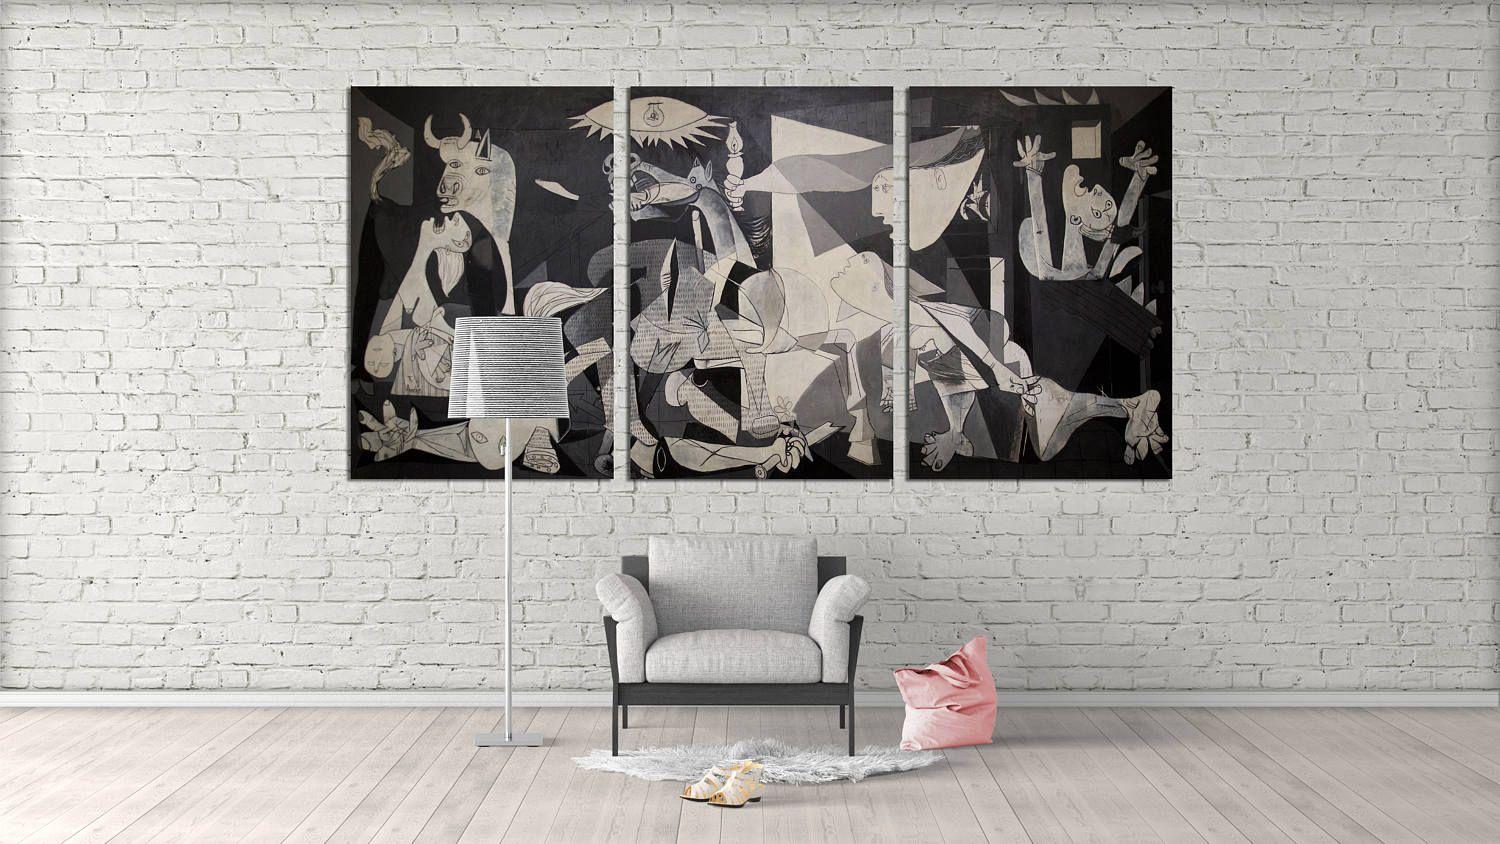 Spain Guernica by Pablo Picasso large wall art canvas print